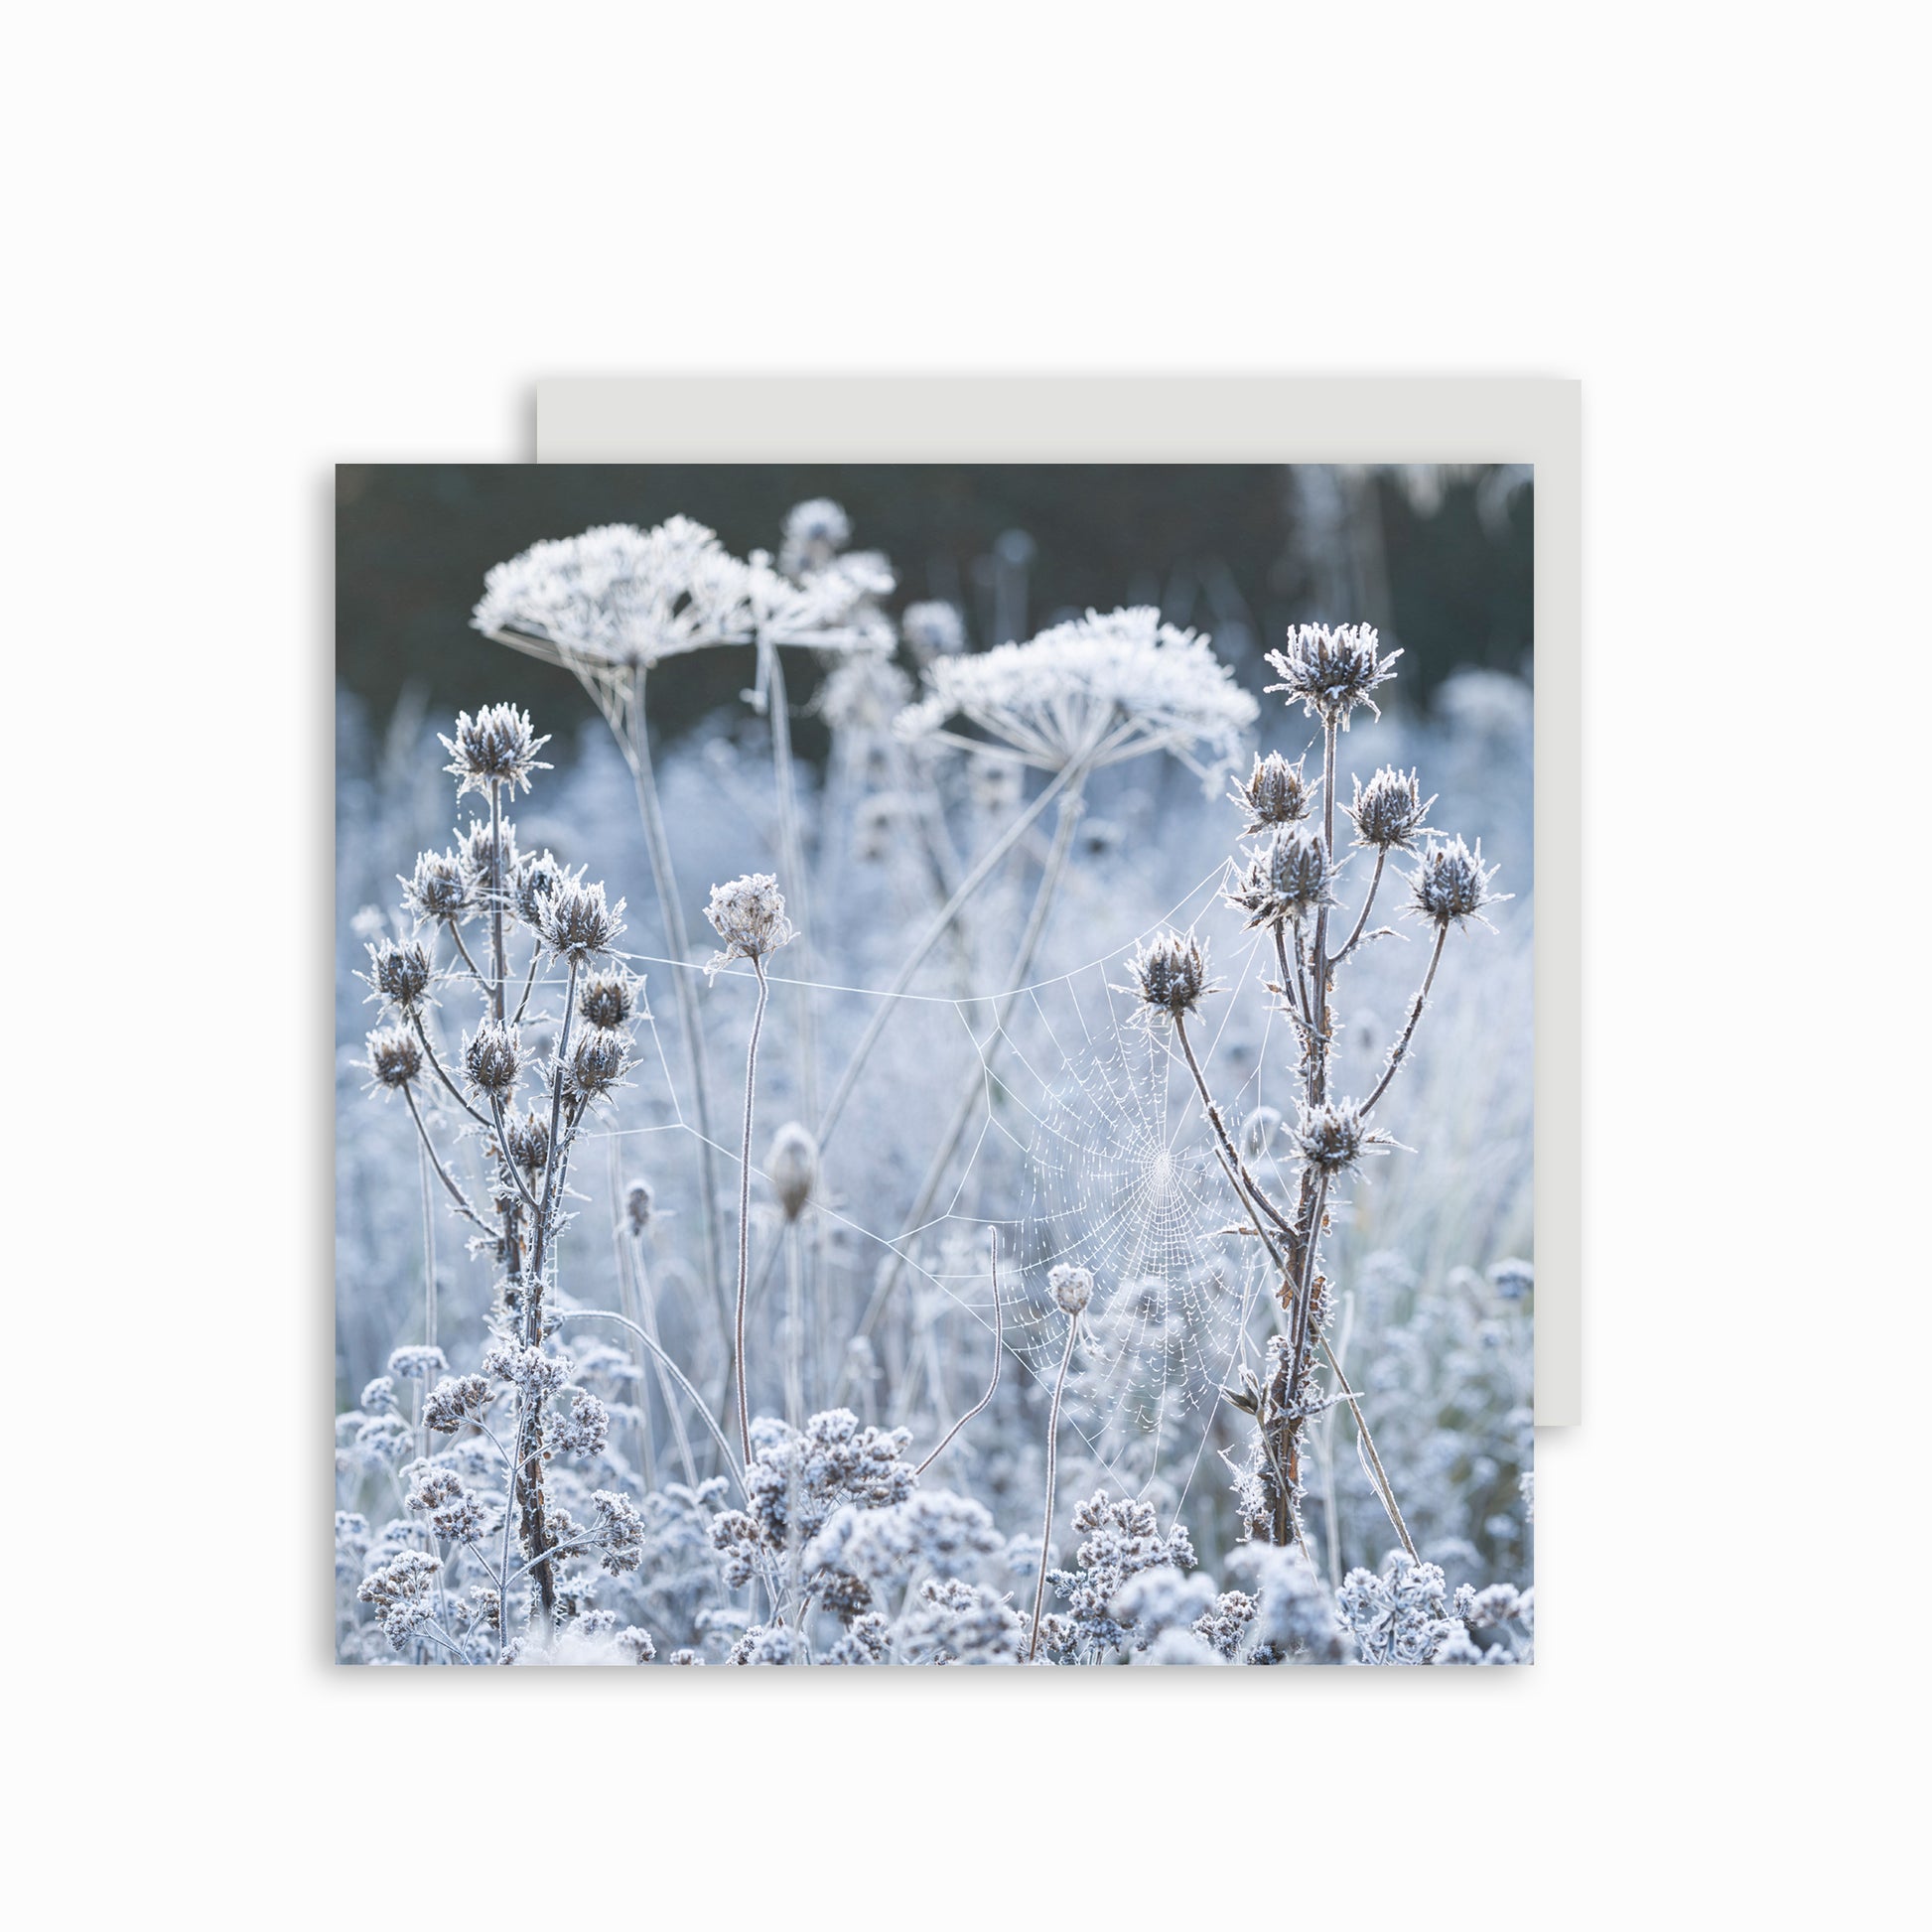 Christmas card featuring frosted cobweb on seedheads image. 